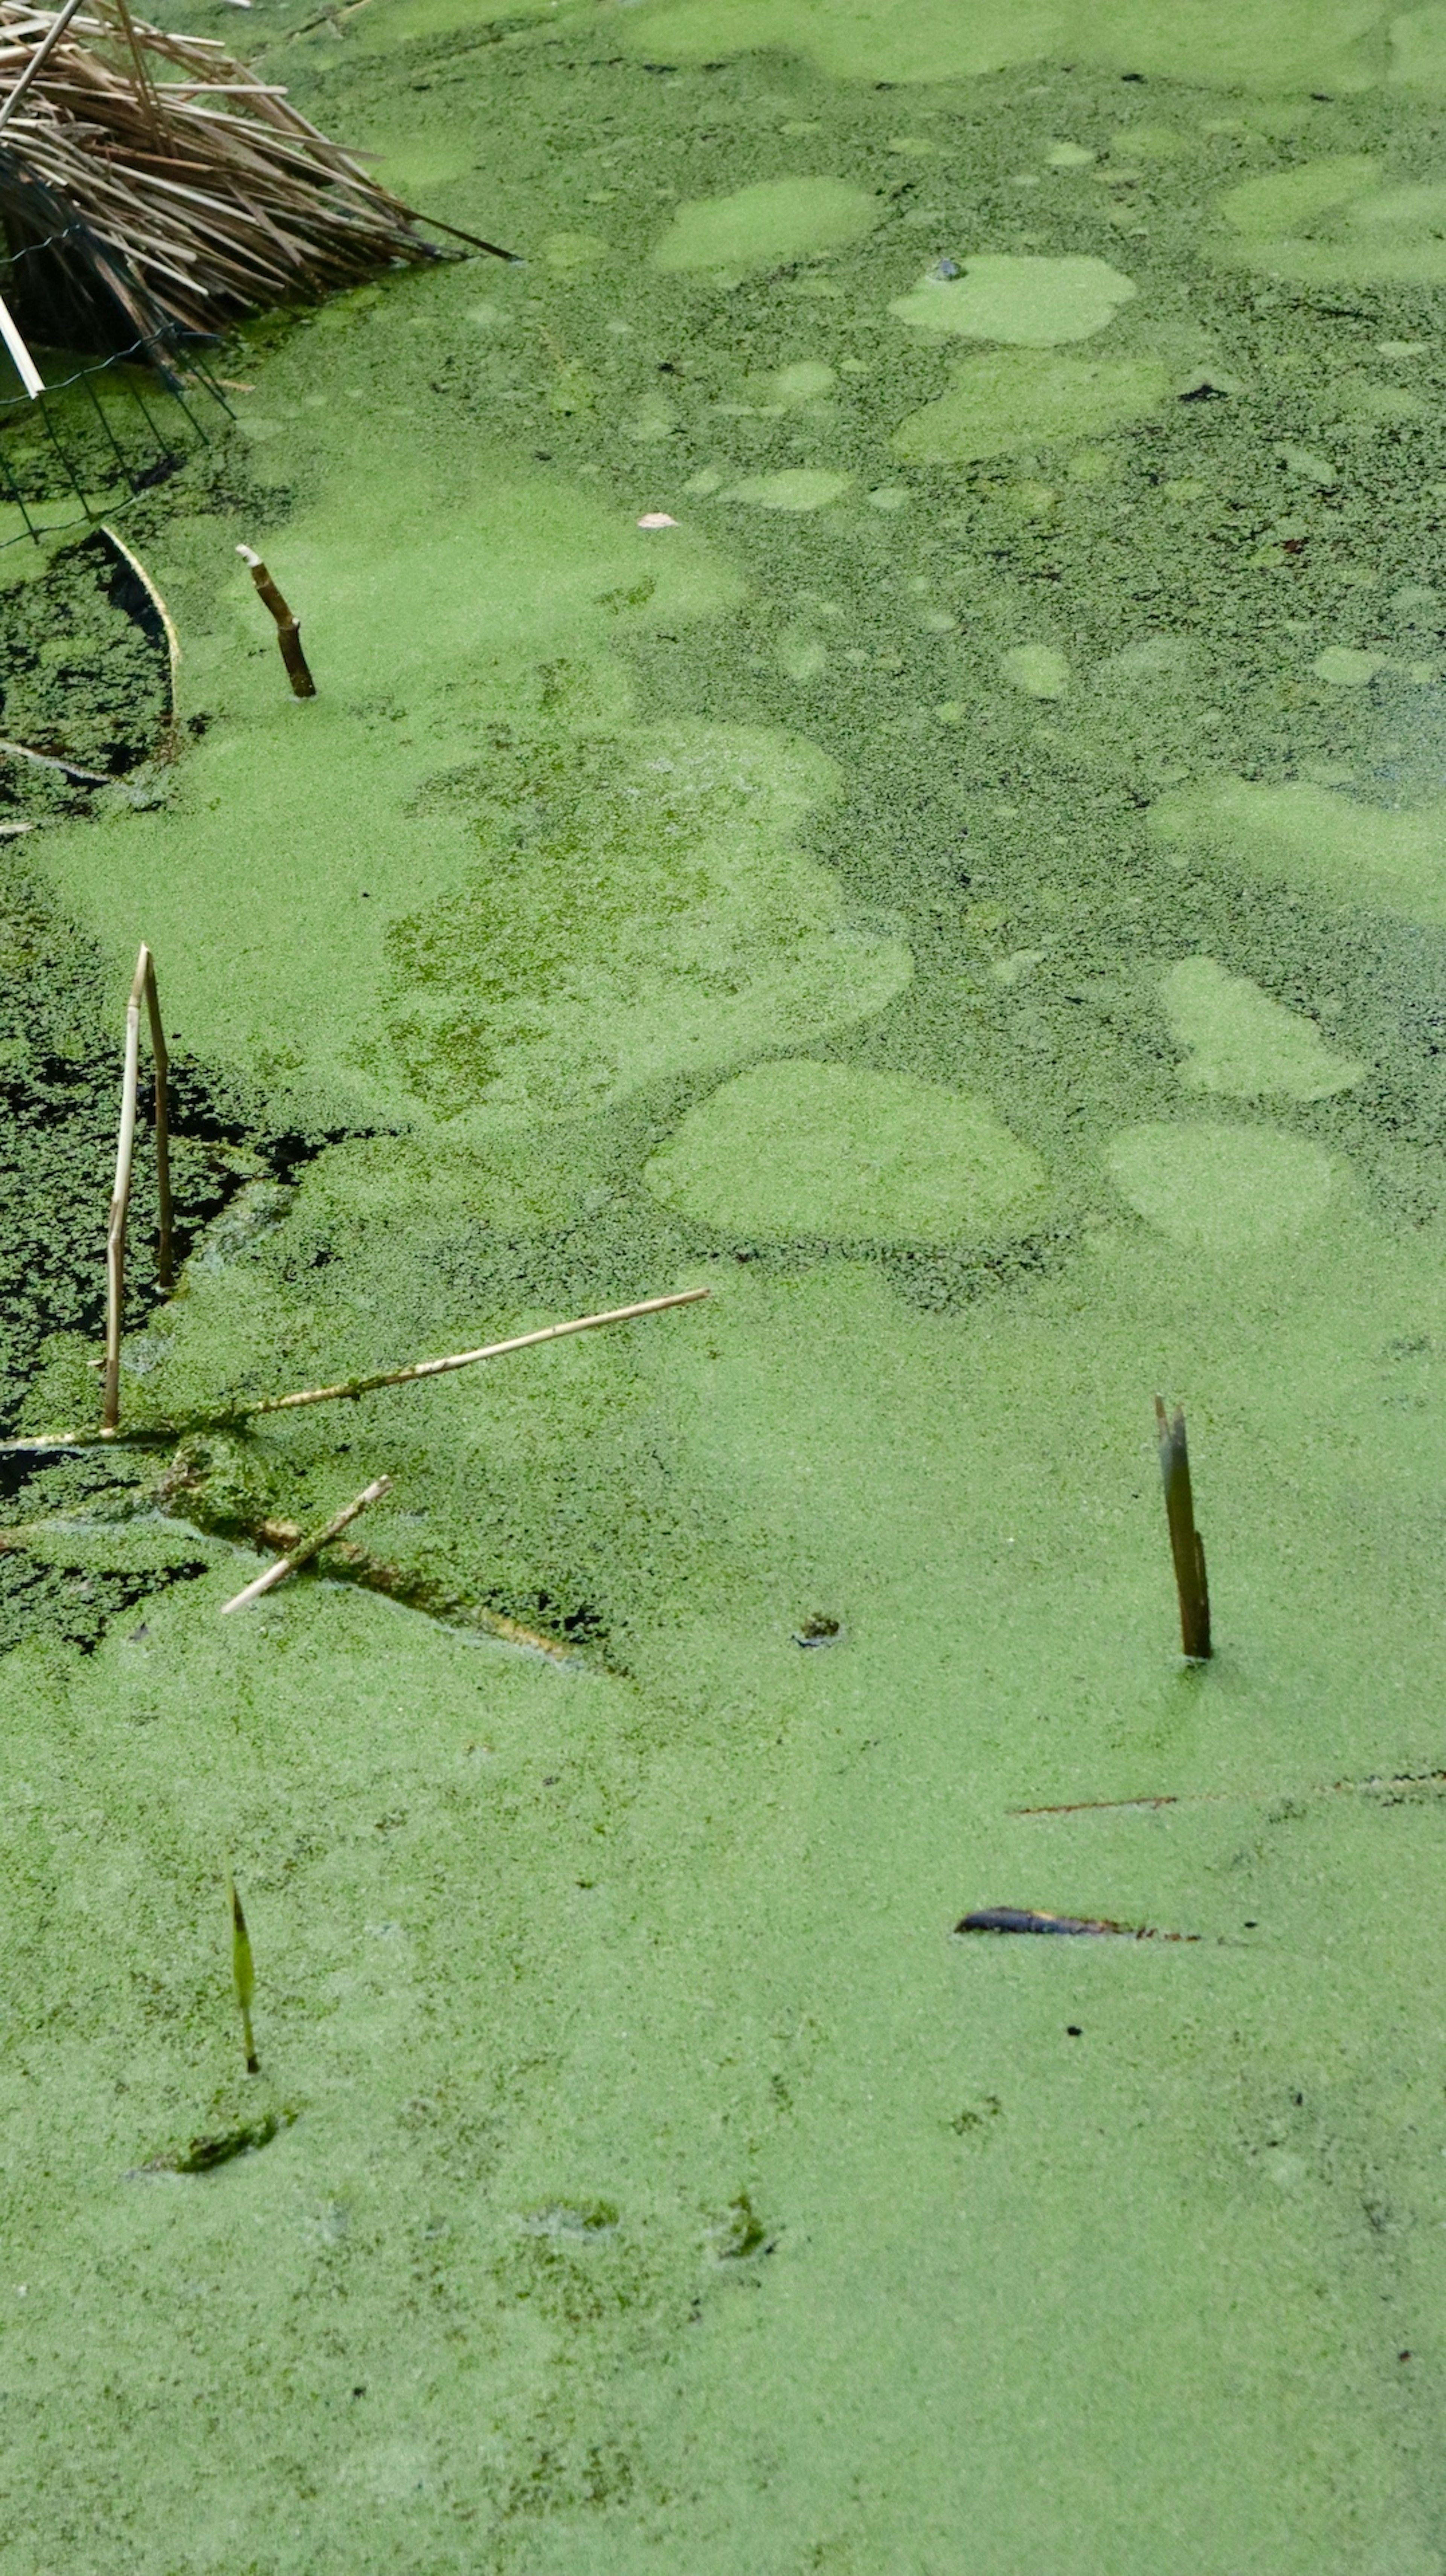 Actual conditions of algal blooms in water bodies.
Taken by Canon M200
Shooting Date: 2024/03/20